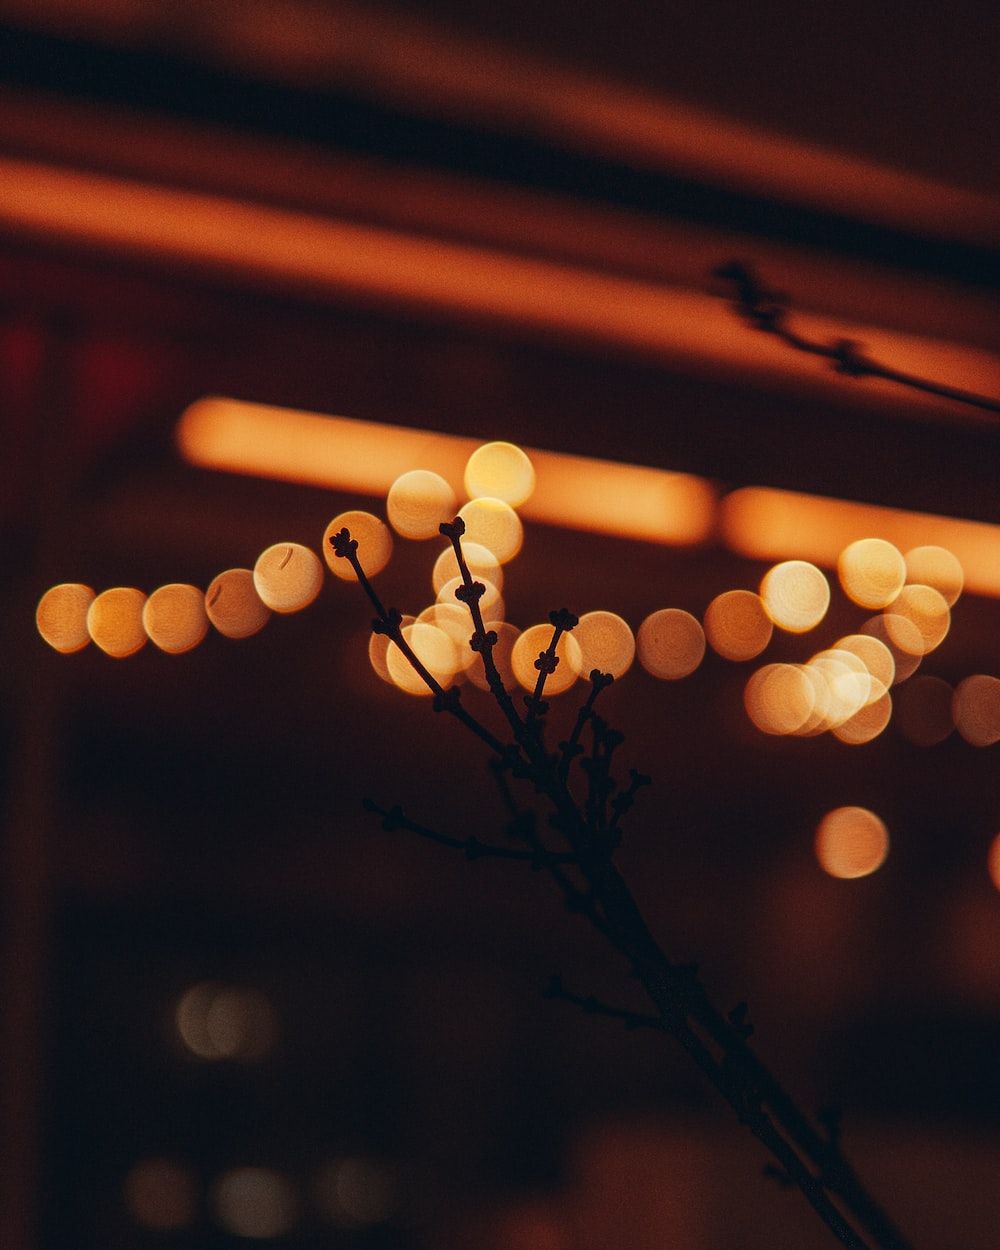 A blurry photo of a branch with lights in the background photo